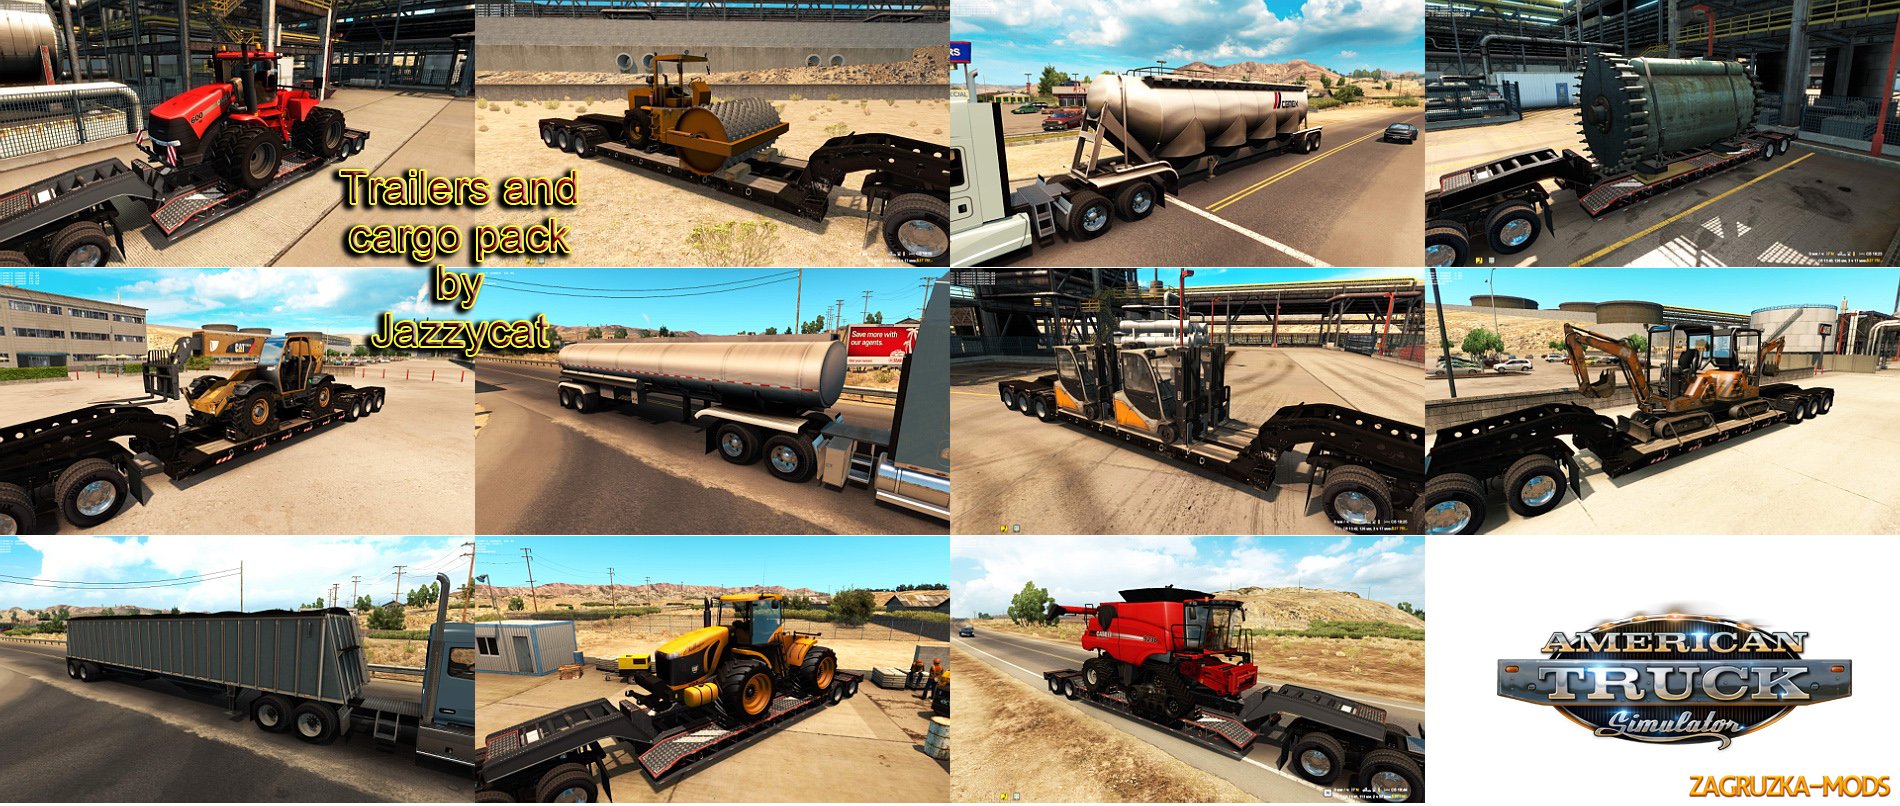 ATS Trailers and cargo pack v1.0 by Jazzycat